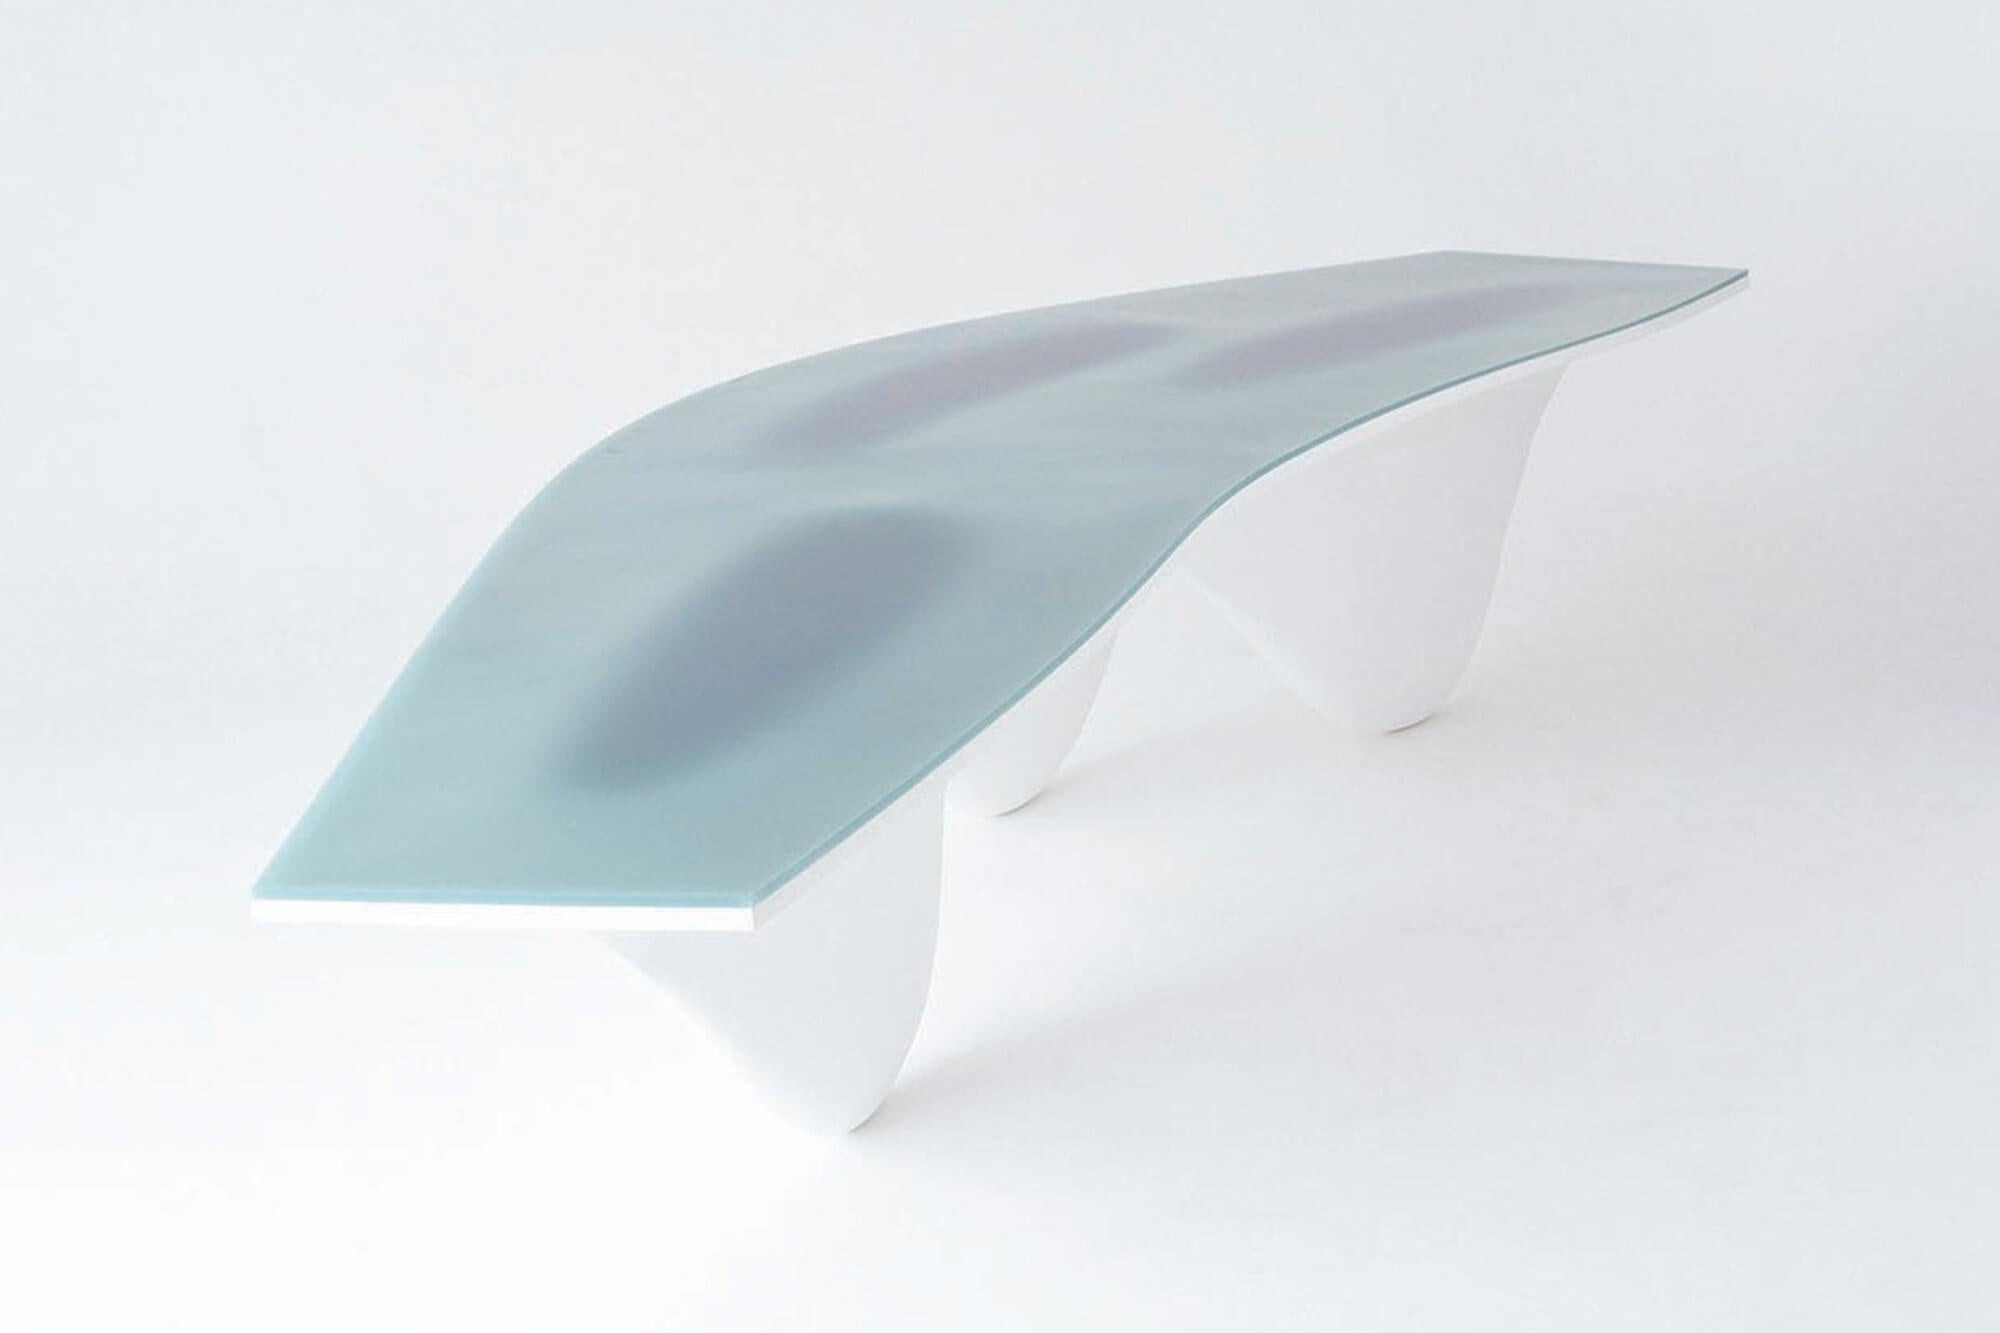 Zaha Hadid’s voluptuous Aqua table is an uninterrupted whole – a curious and curvaceous form that invites viewers to engage with it. Standing as an impressive centerpiece it delivers a stylish focal point in any space. The three n-like legs of the